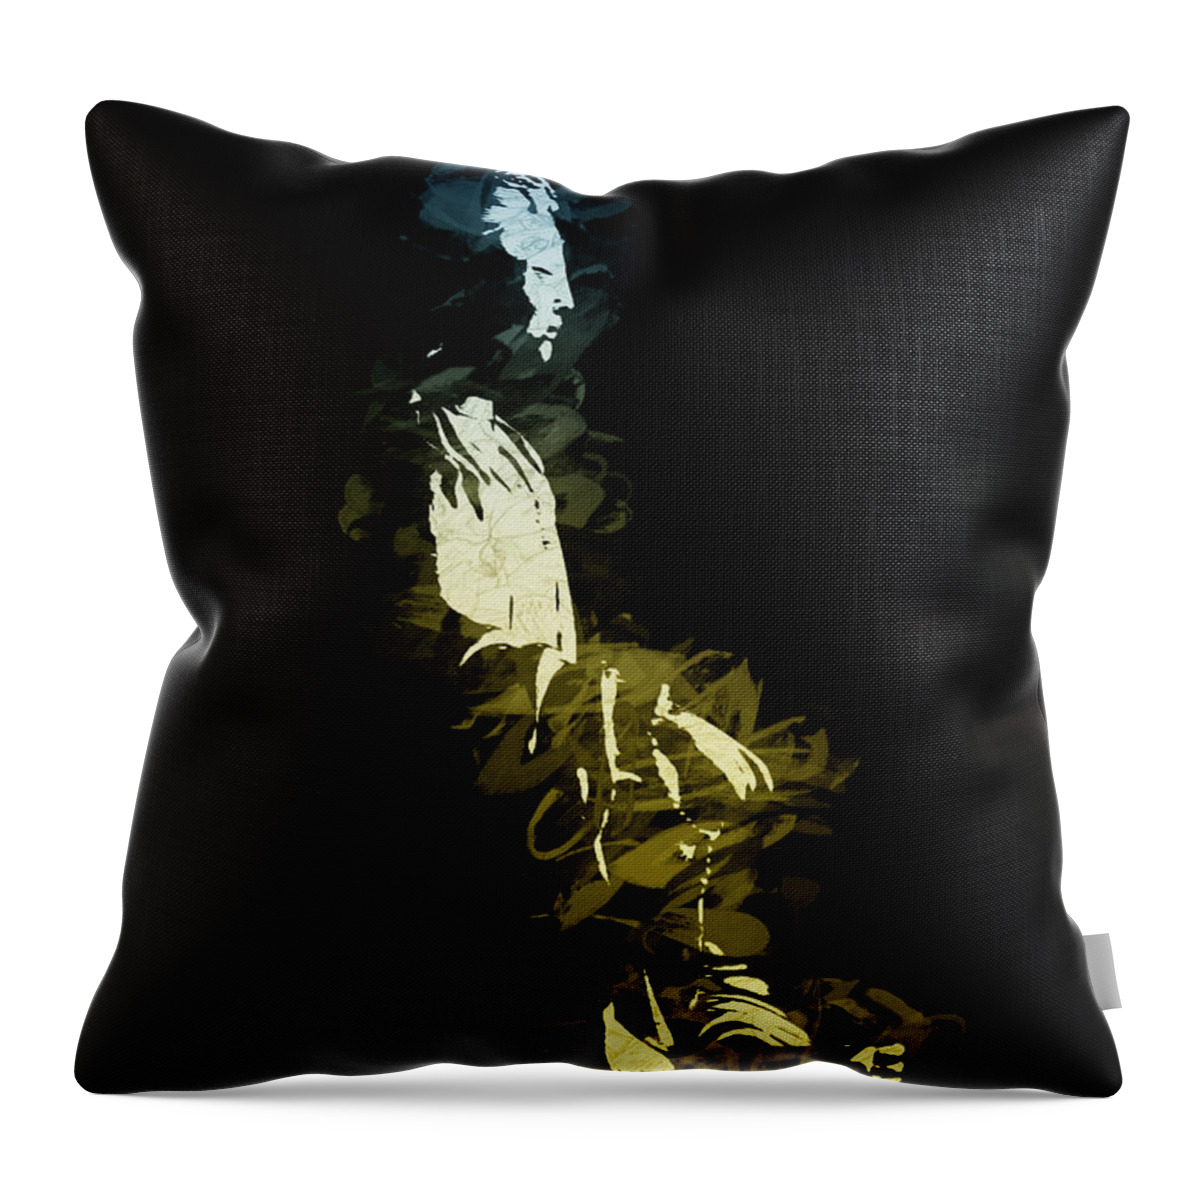 Calm Amidst Chaos In Color Throw Pillow featuring the photograph Calm Amidst Chaos In Color by Kandy Hurley